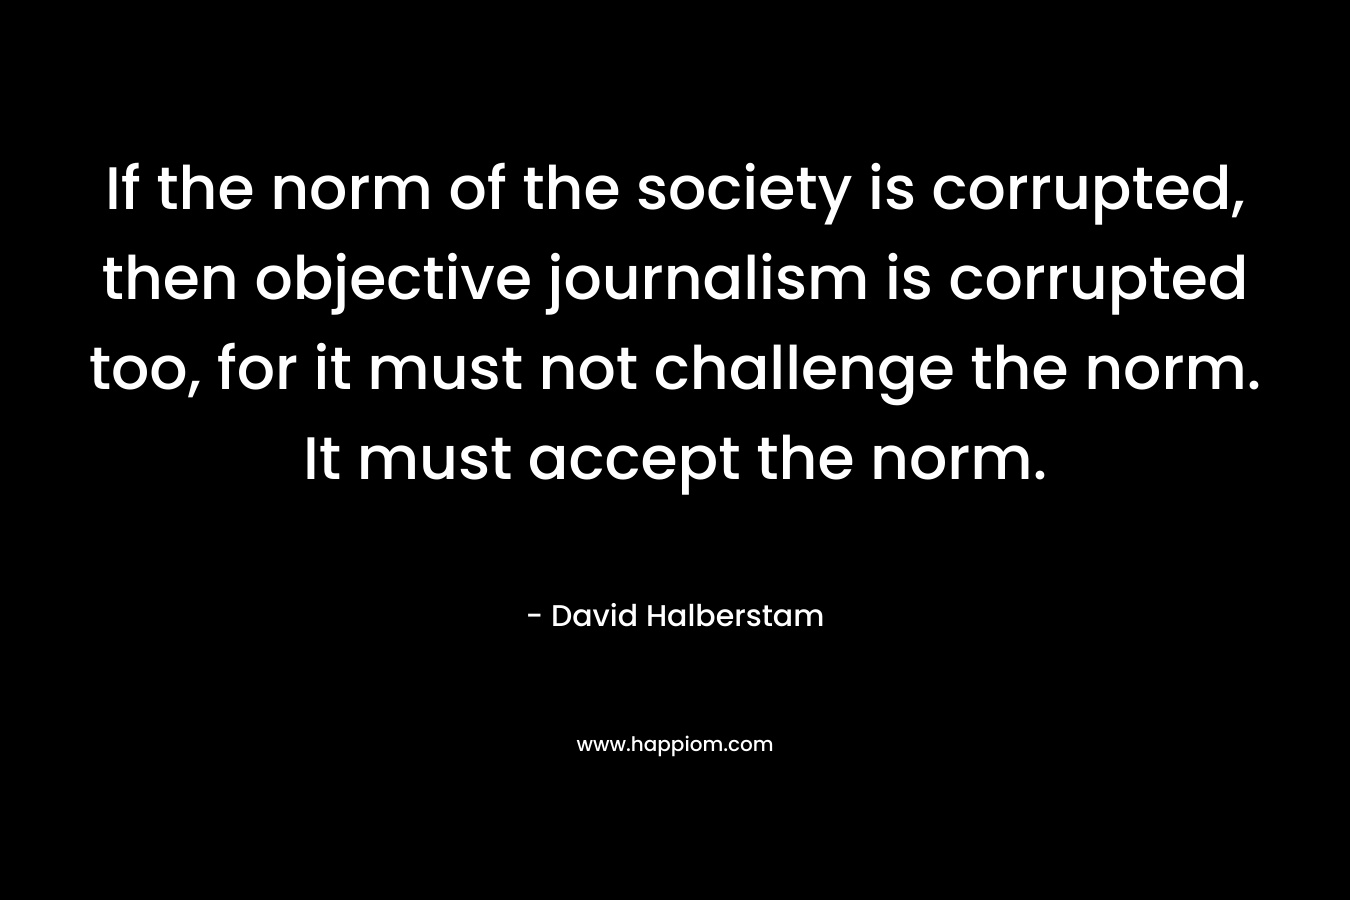 If the norm of the society is corrupted, then objective journalism is corrupted too, for it must not challenge the norm. It must accept the norm. – David Halberstam